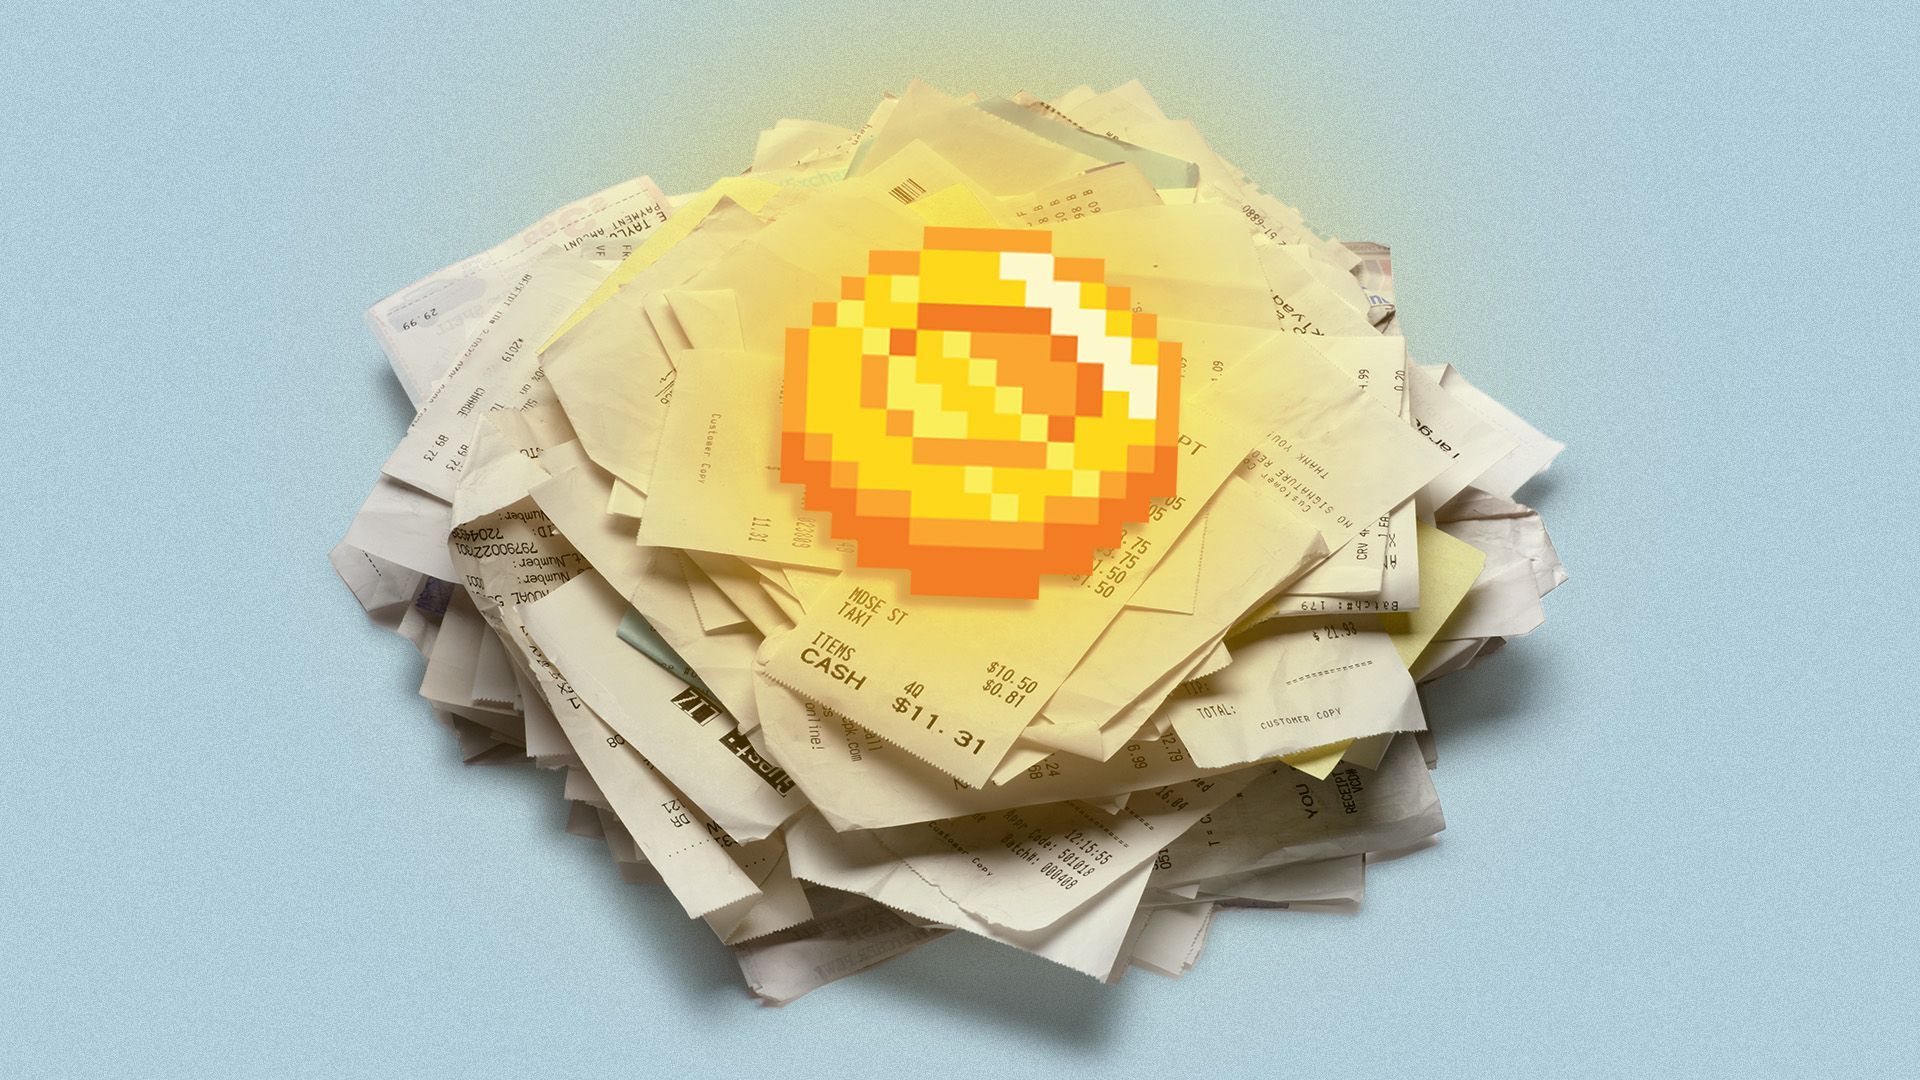 Illustration of a crypto coin glowing atop a pile of receipts